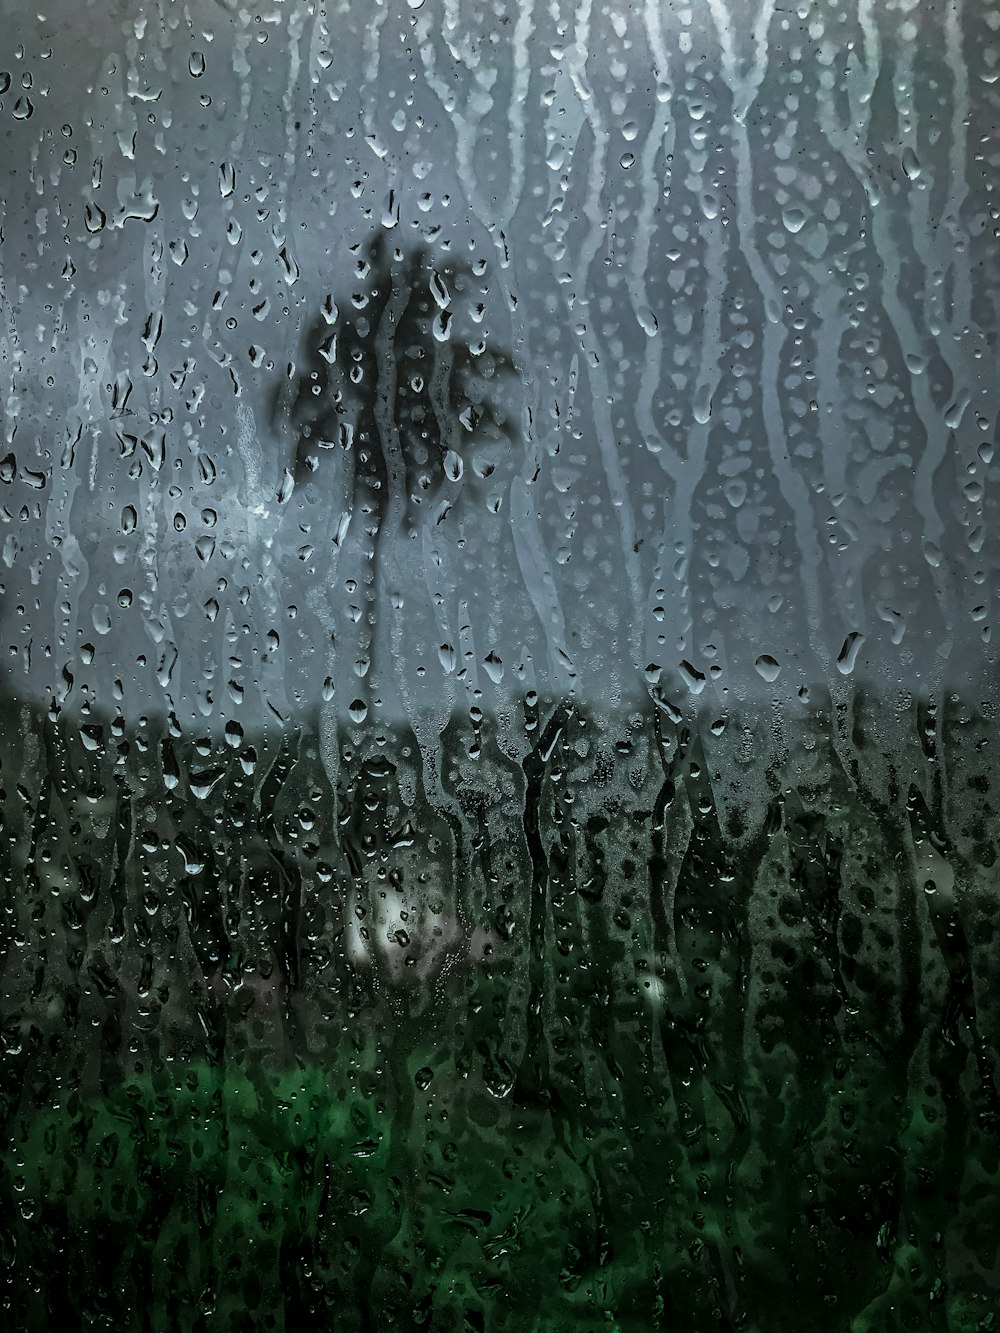 rain drops on a window with a tree in the background